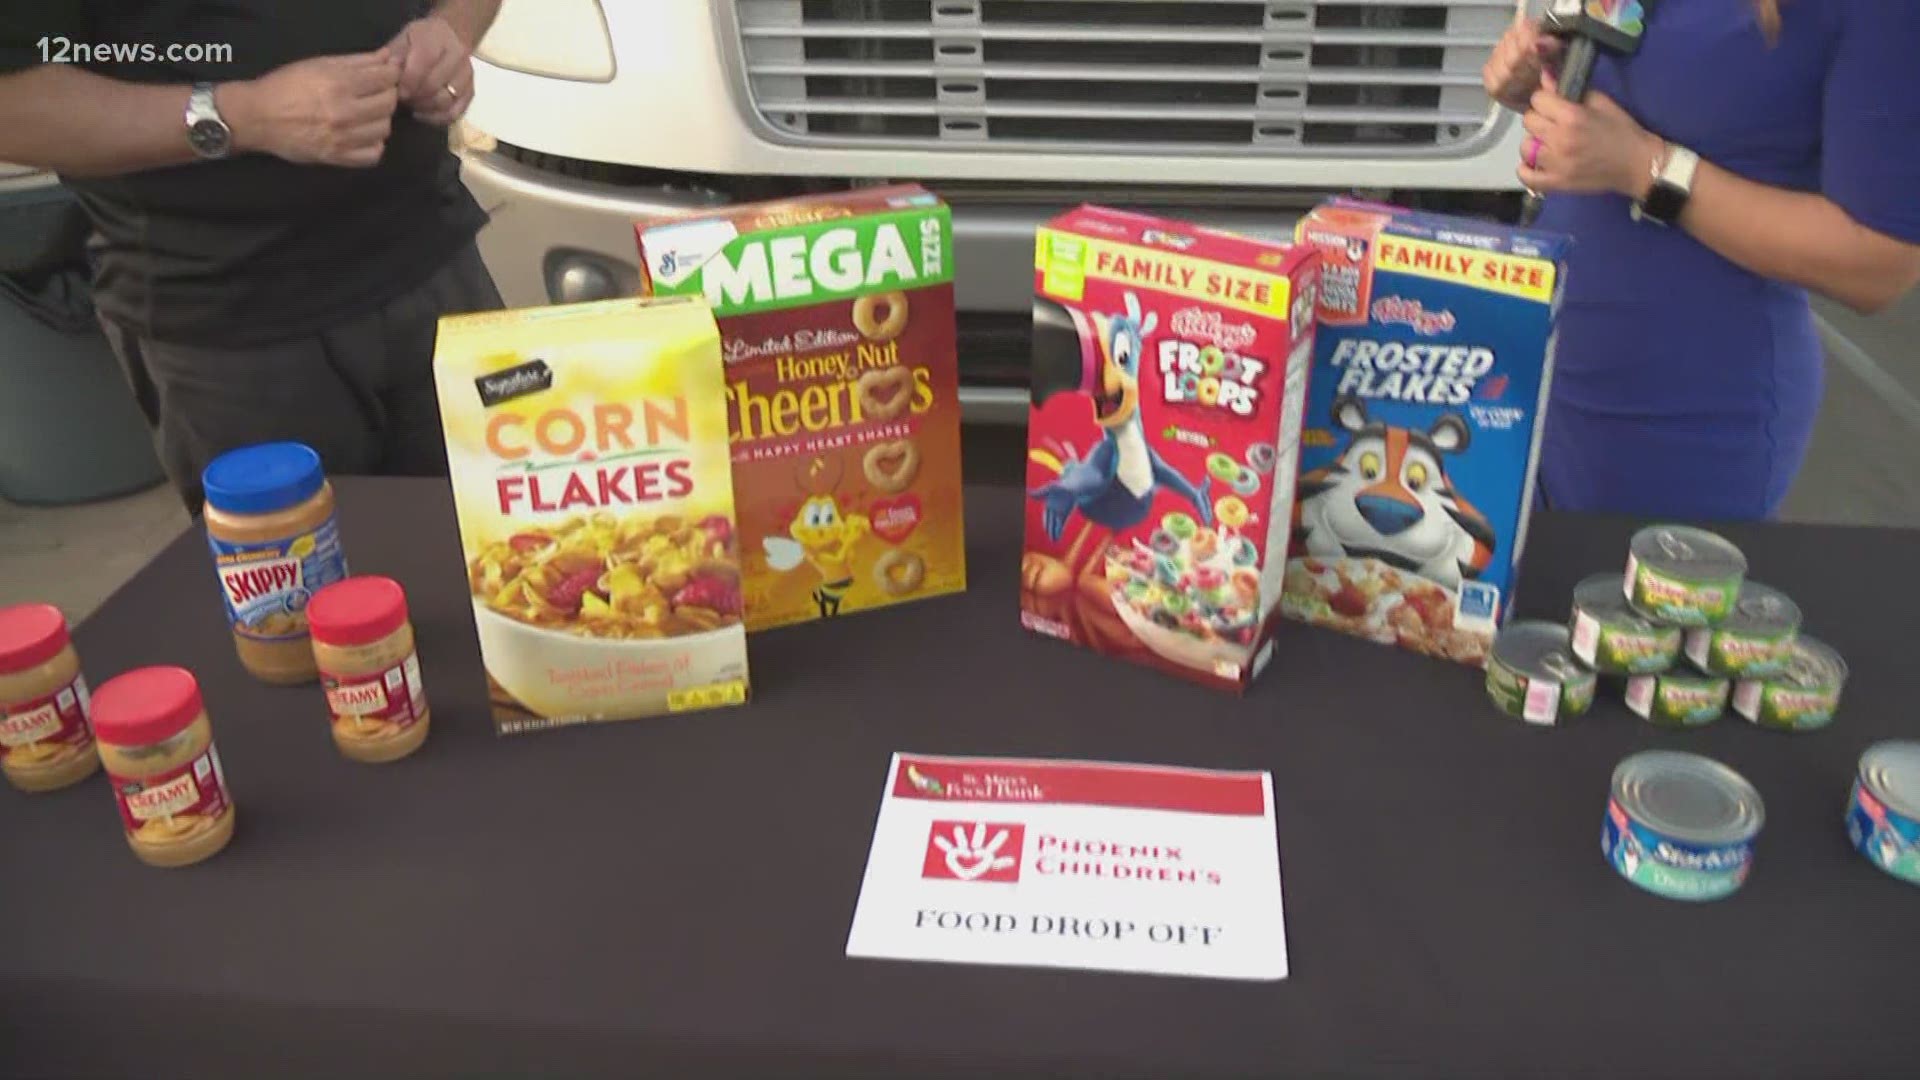 St. Mary's Food Bank and Phoenix Children's Hospital are partnering for a summer food drive. Jen Wahl has the details.